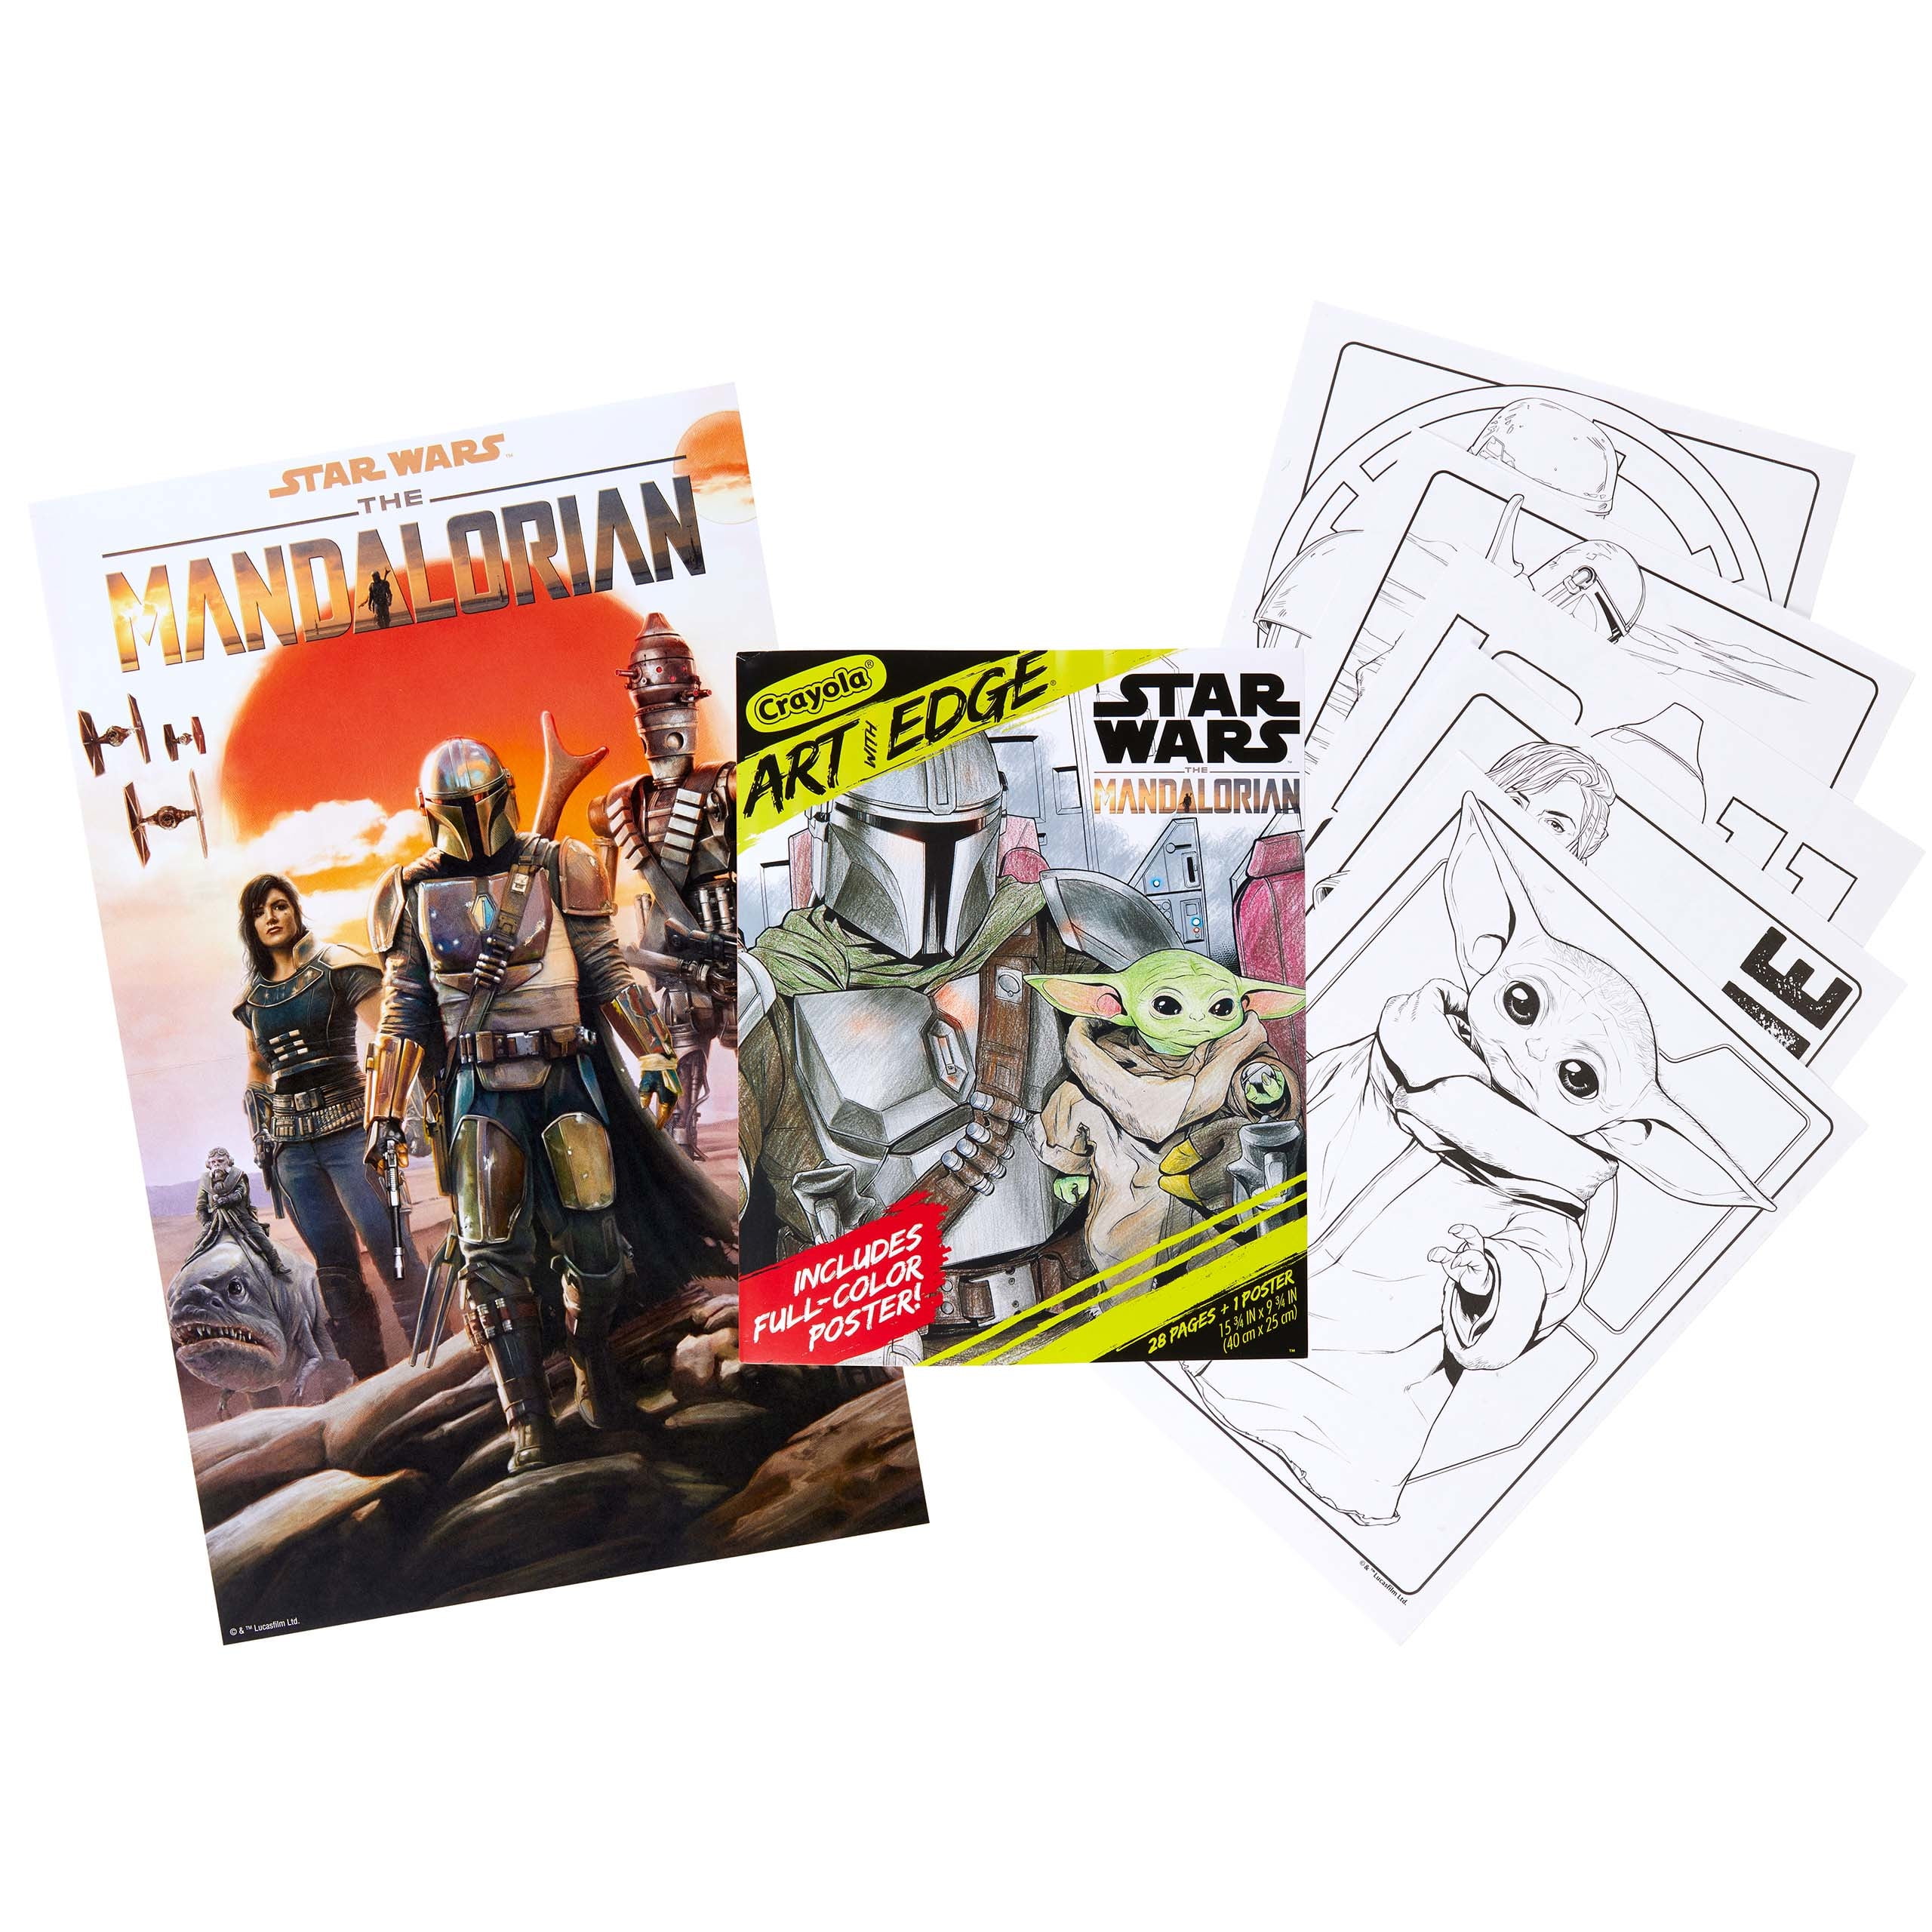 Star Wars The Mandalorian Over 30 Piece Coloring Art and School Supplies Stationary  Set